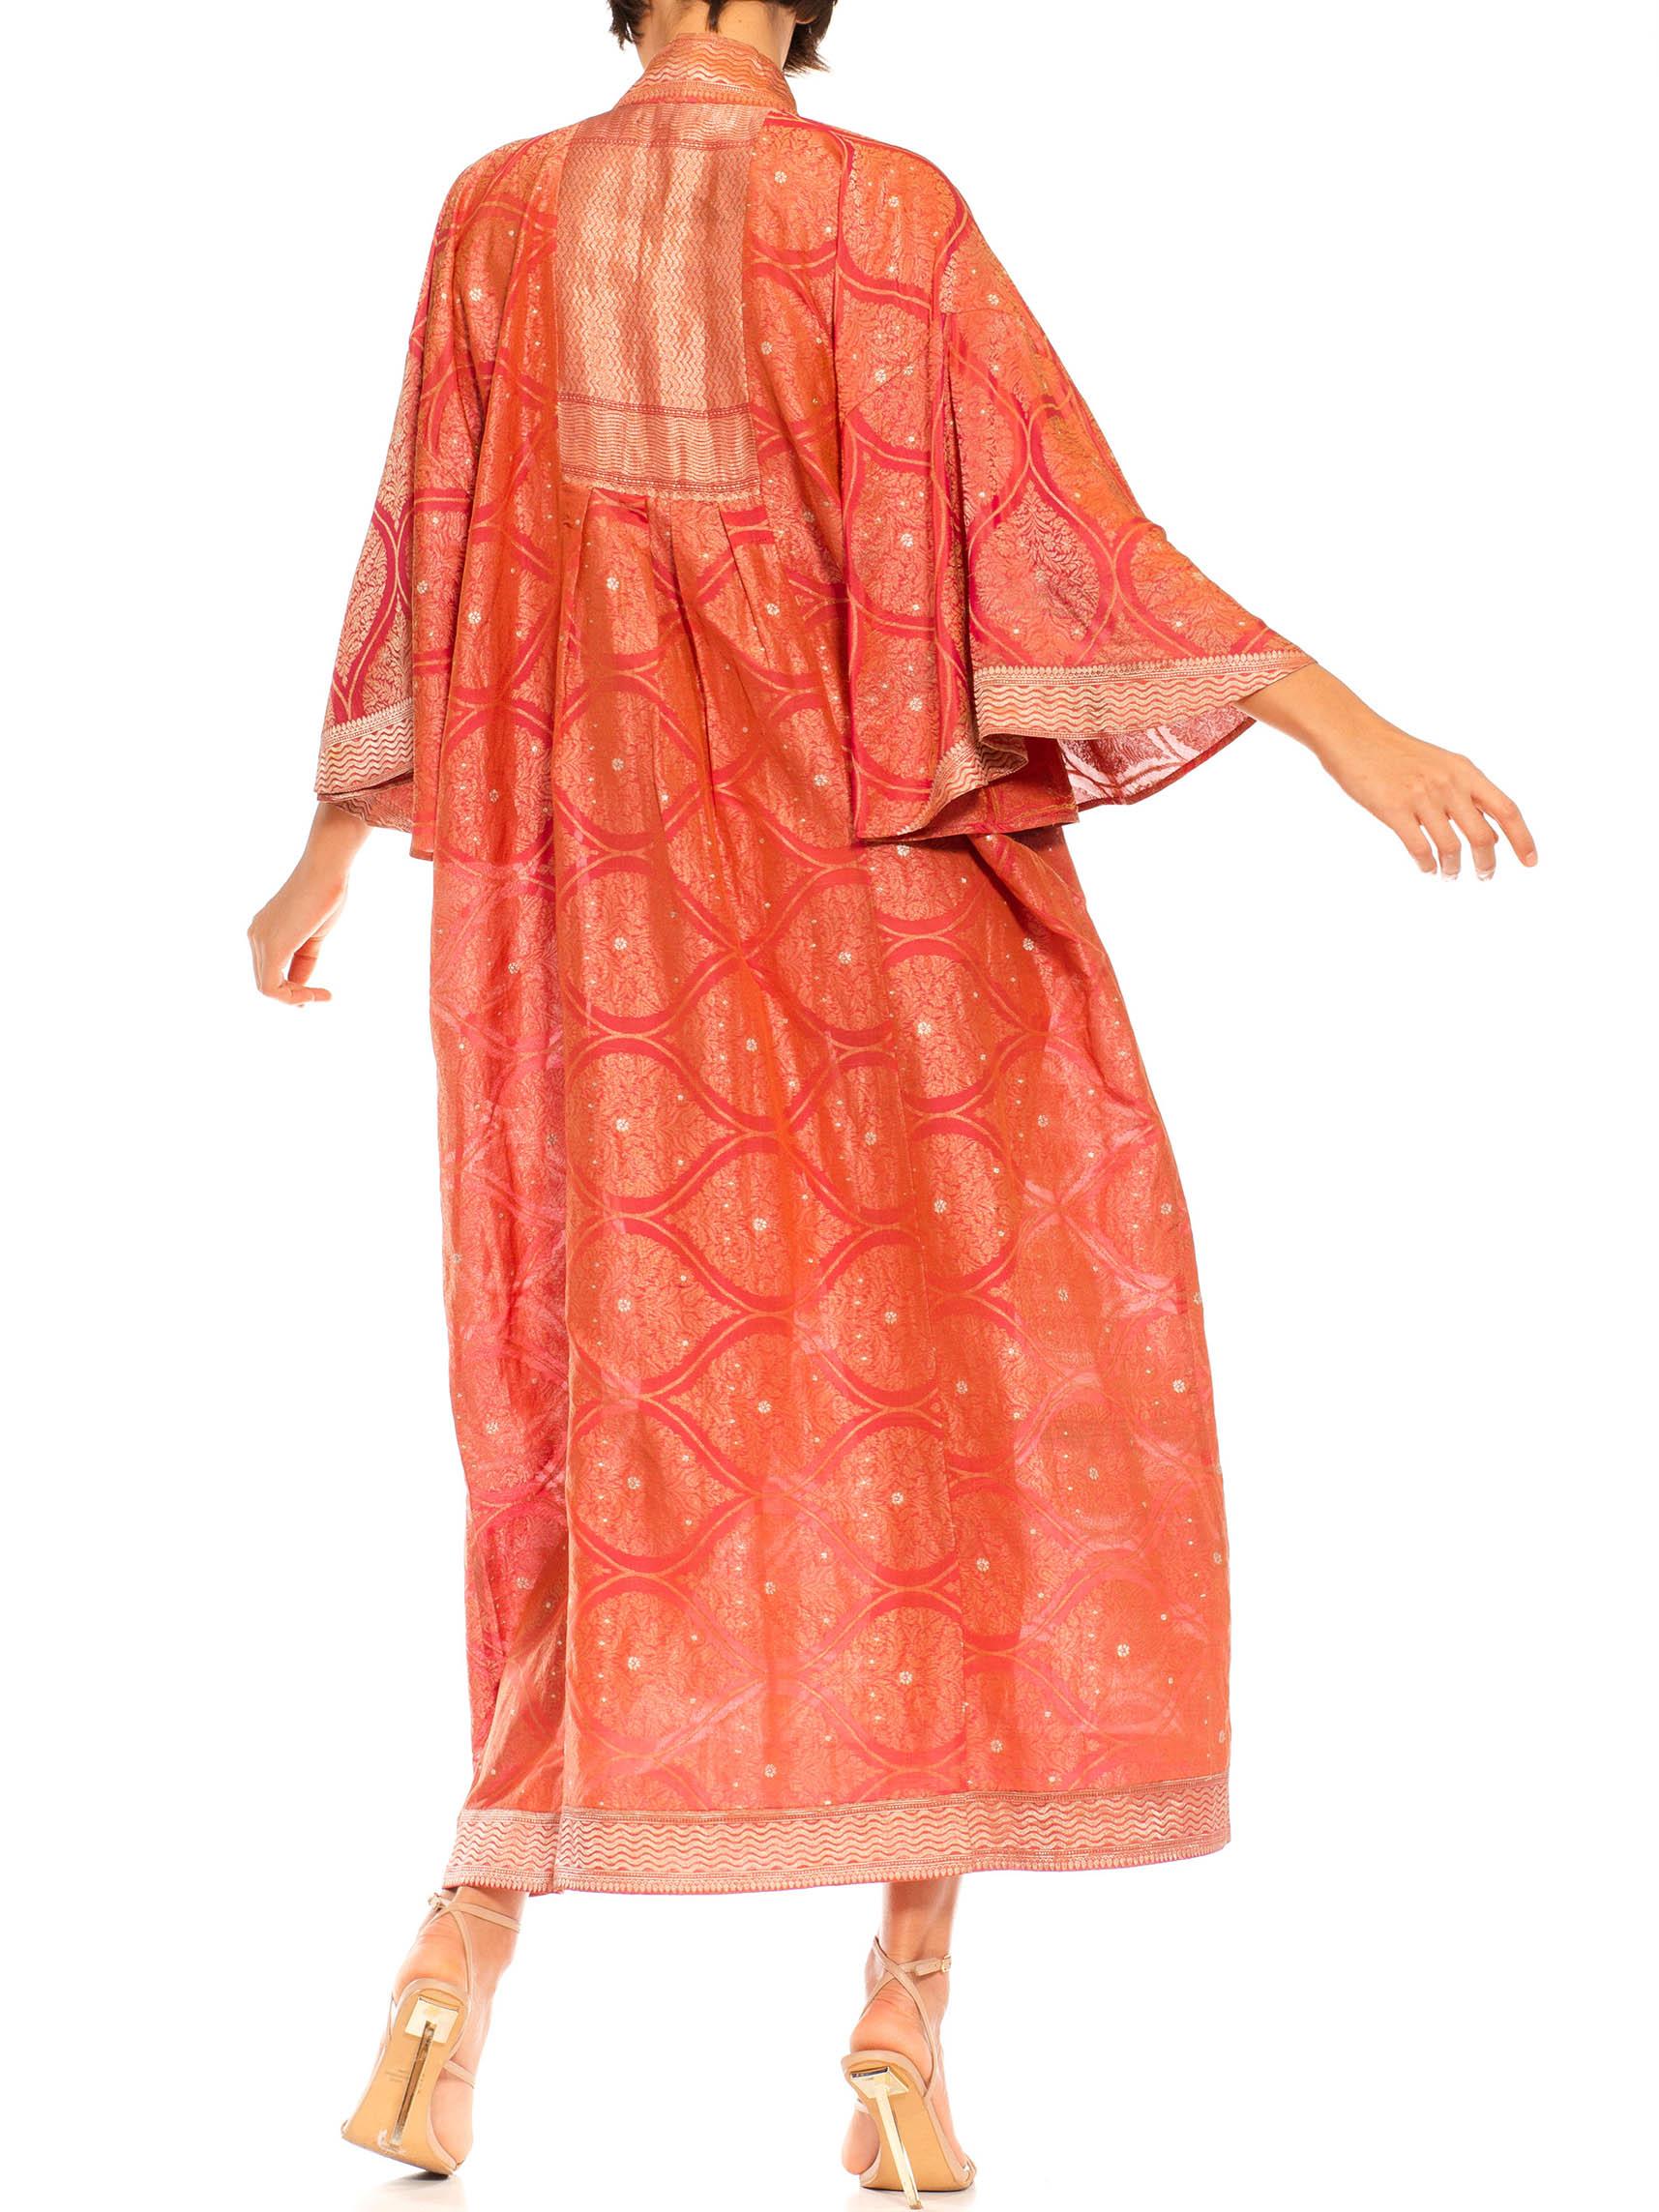 Morphew Collection Pink & Peach Metallic Gold Silk Geometric Kaftan Made From V In Excellent Condition For Sale In New York, NY